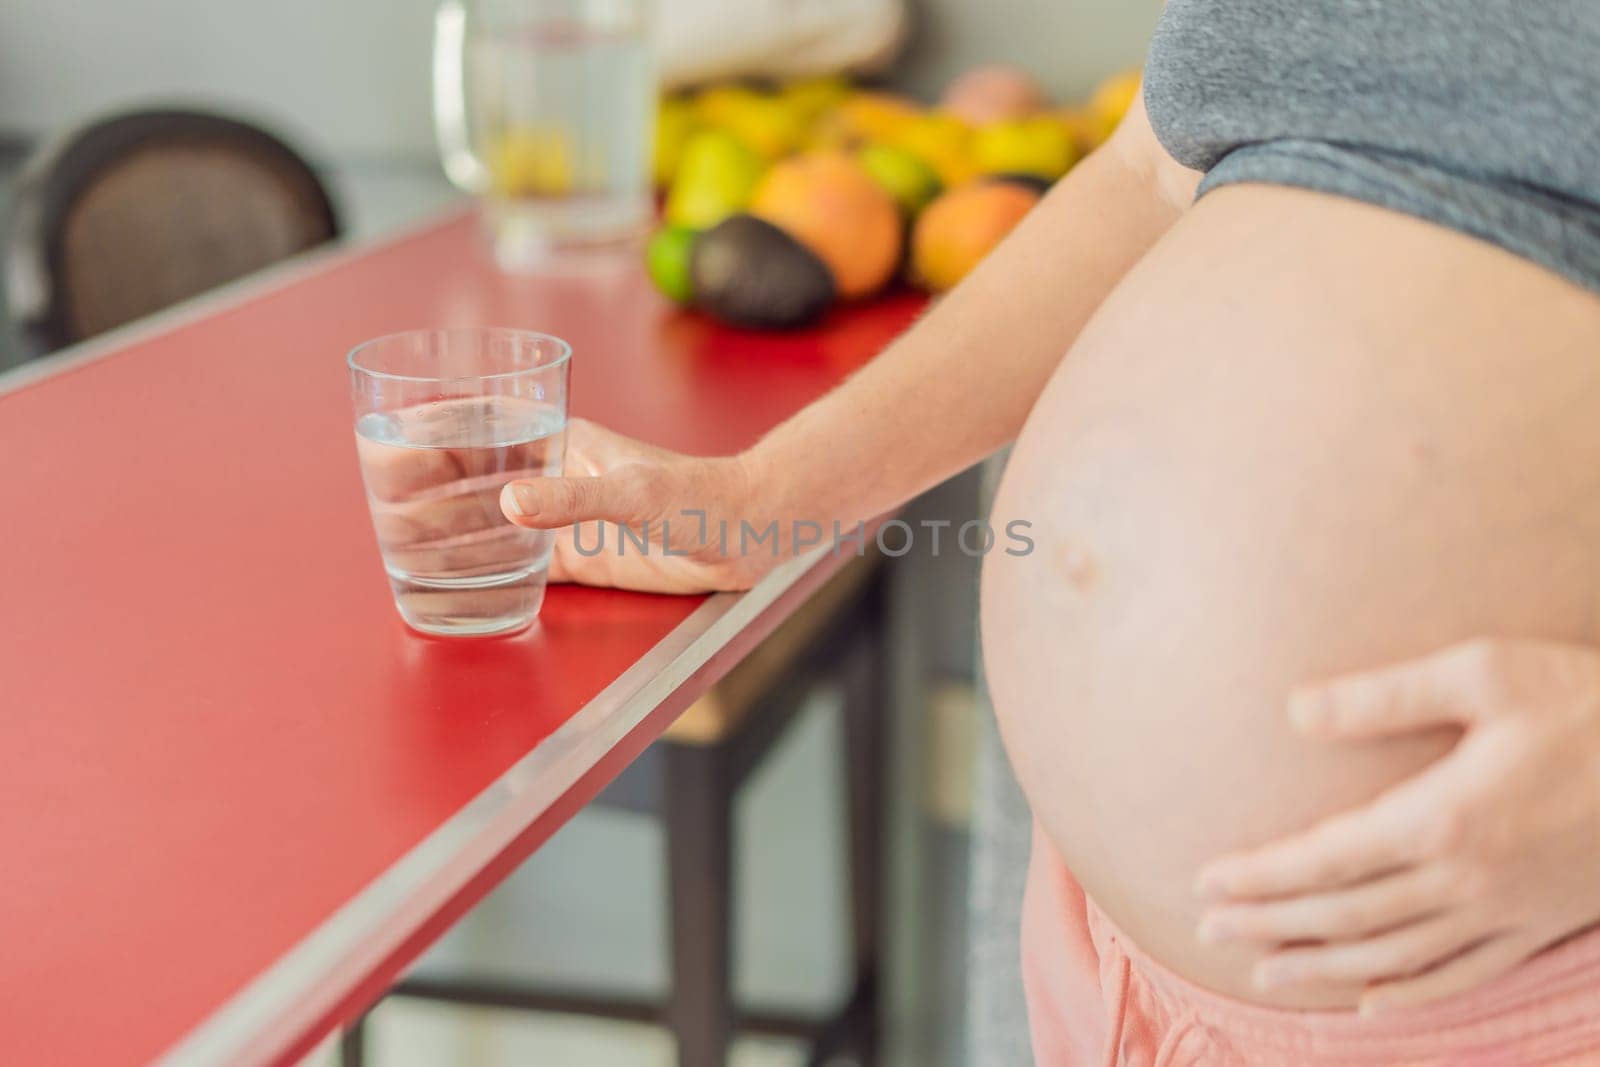 Embracing the vital benefits of water during pregnancy, a pregnant woman stands in the kitchen with a glass, highlighting hydration's crucial role in maternal well-being.